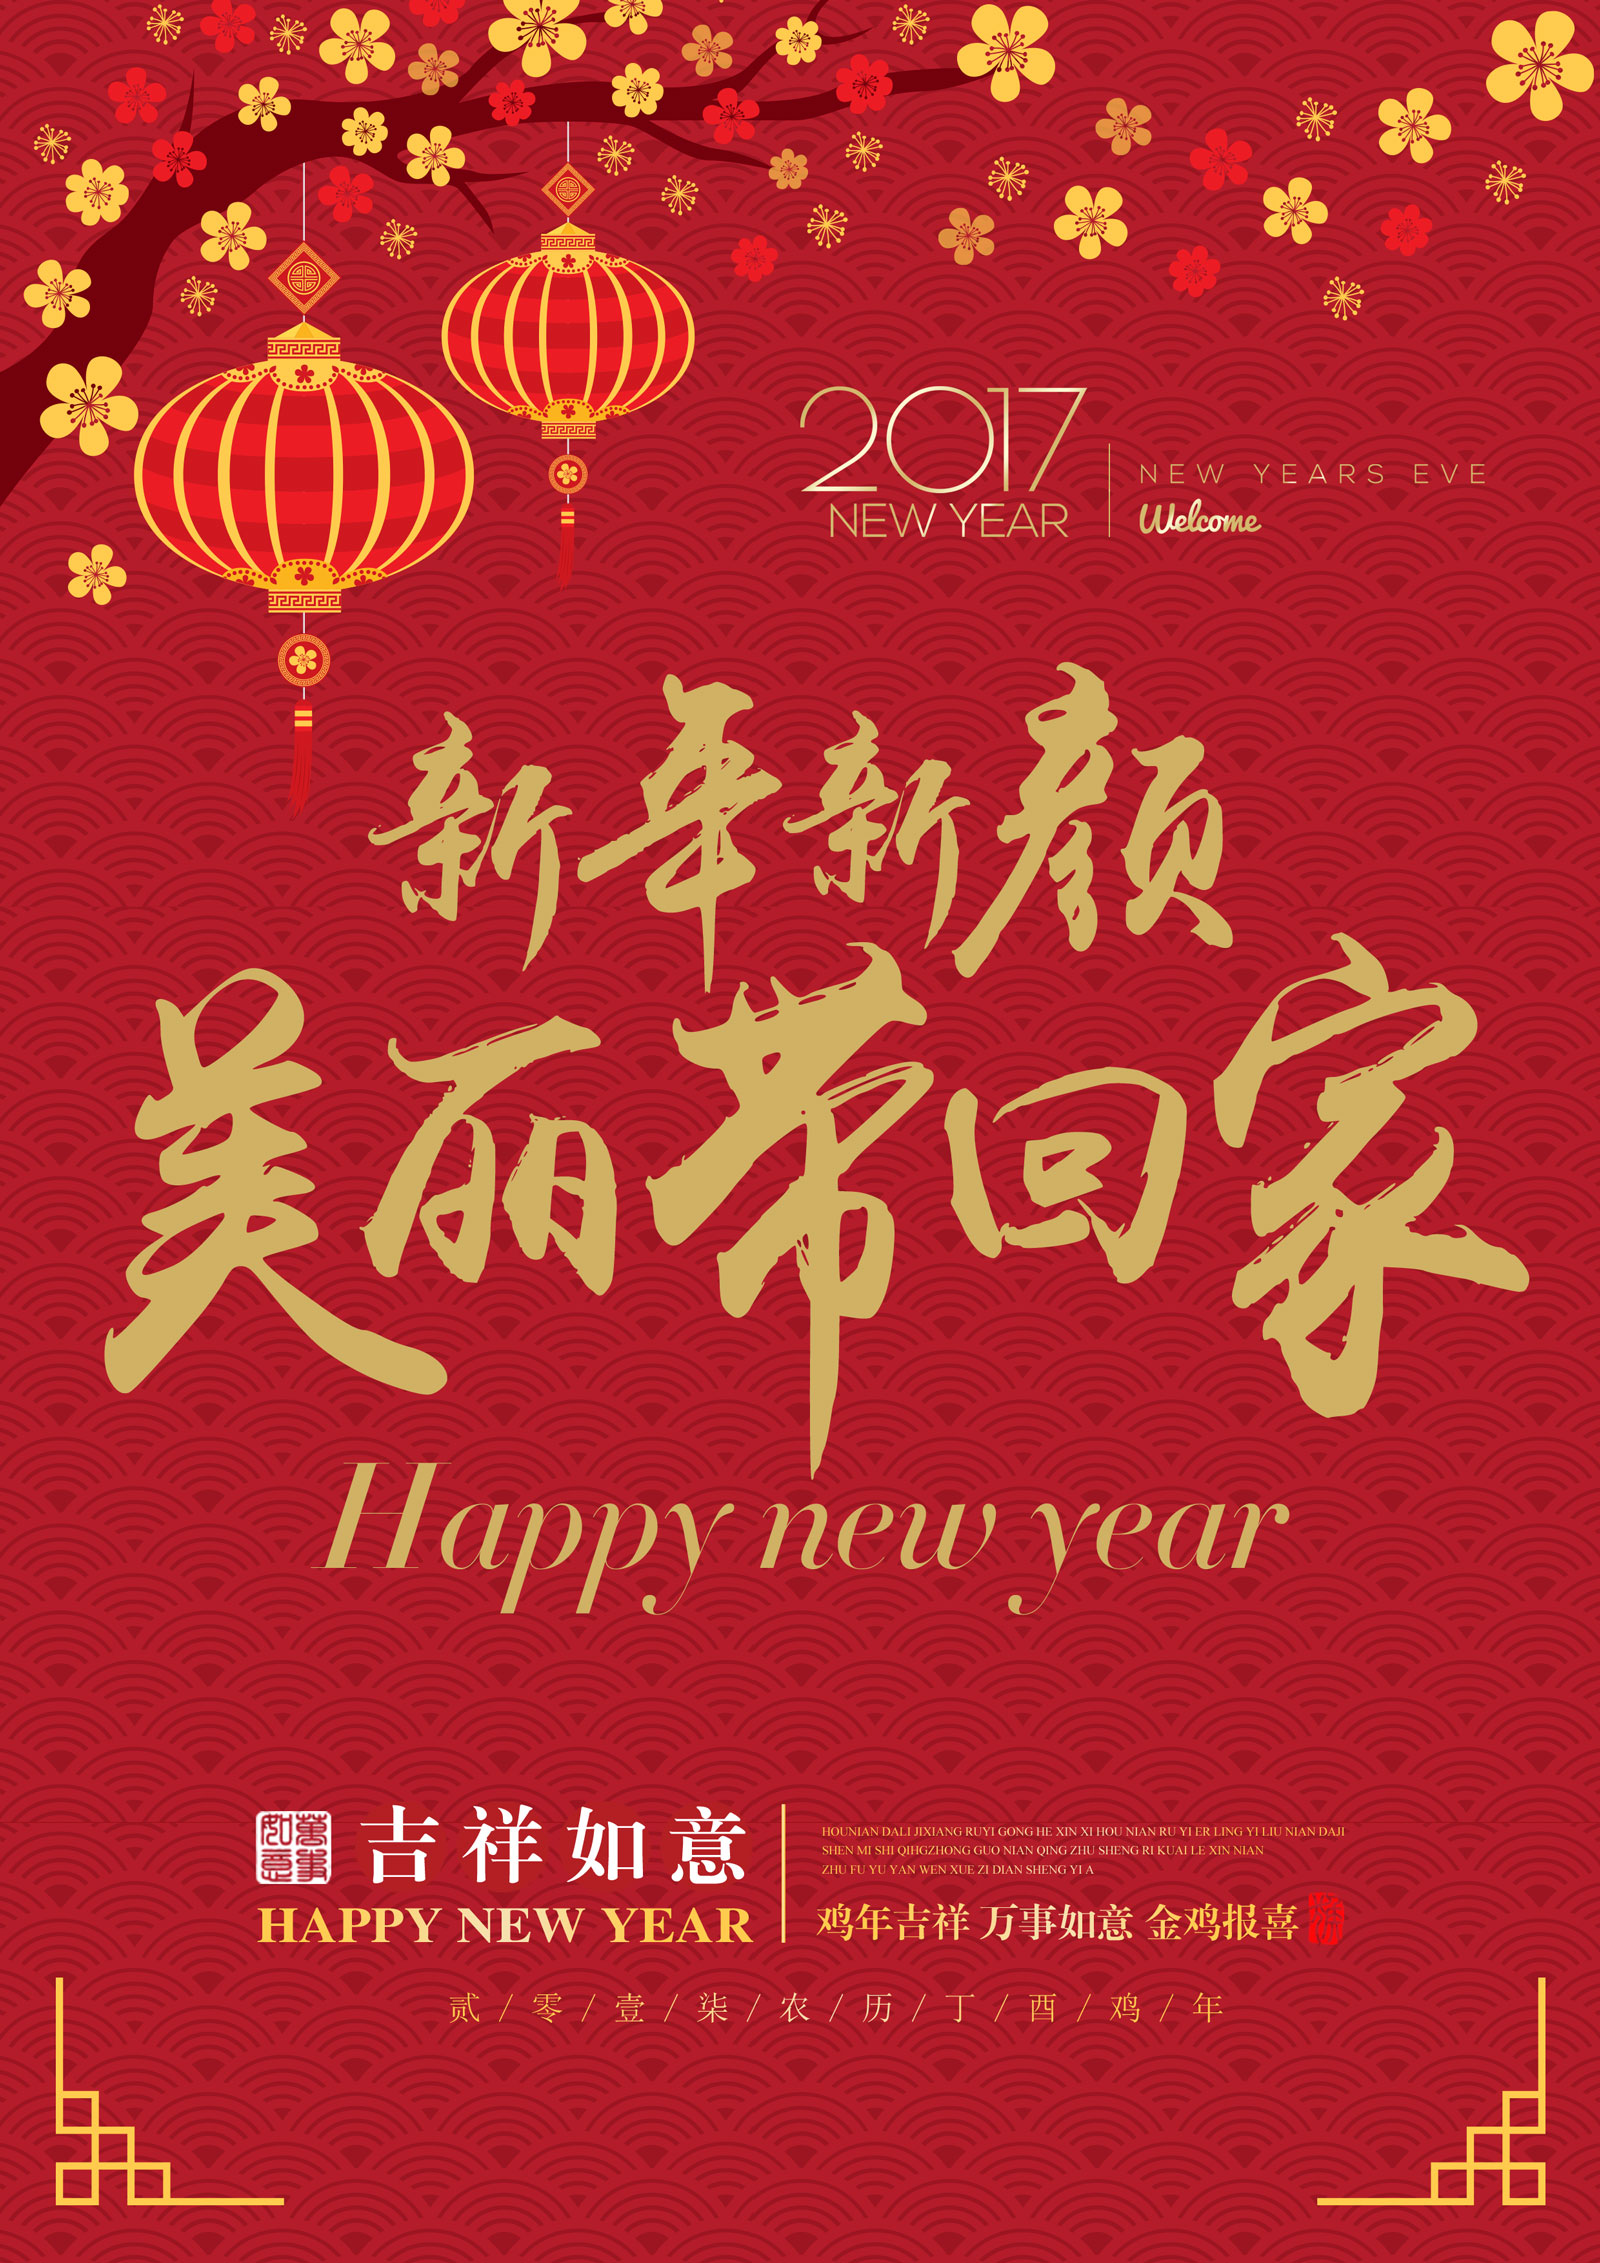 Chinese festival poster design - China PSD File Free Download